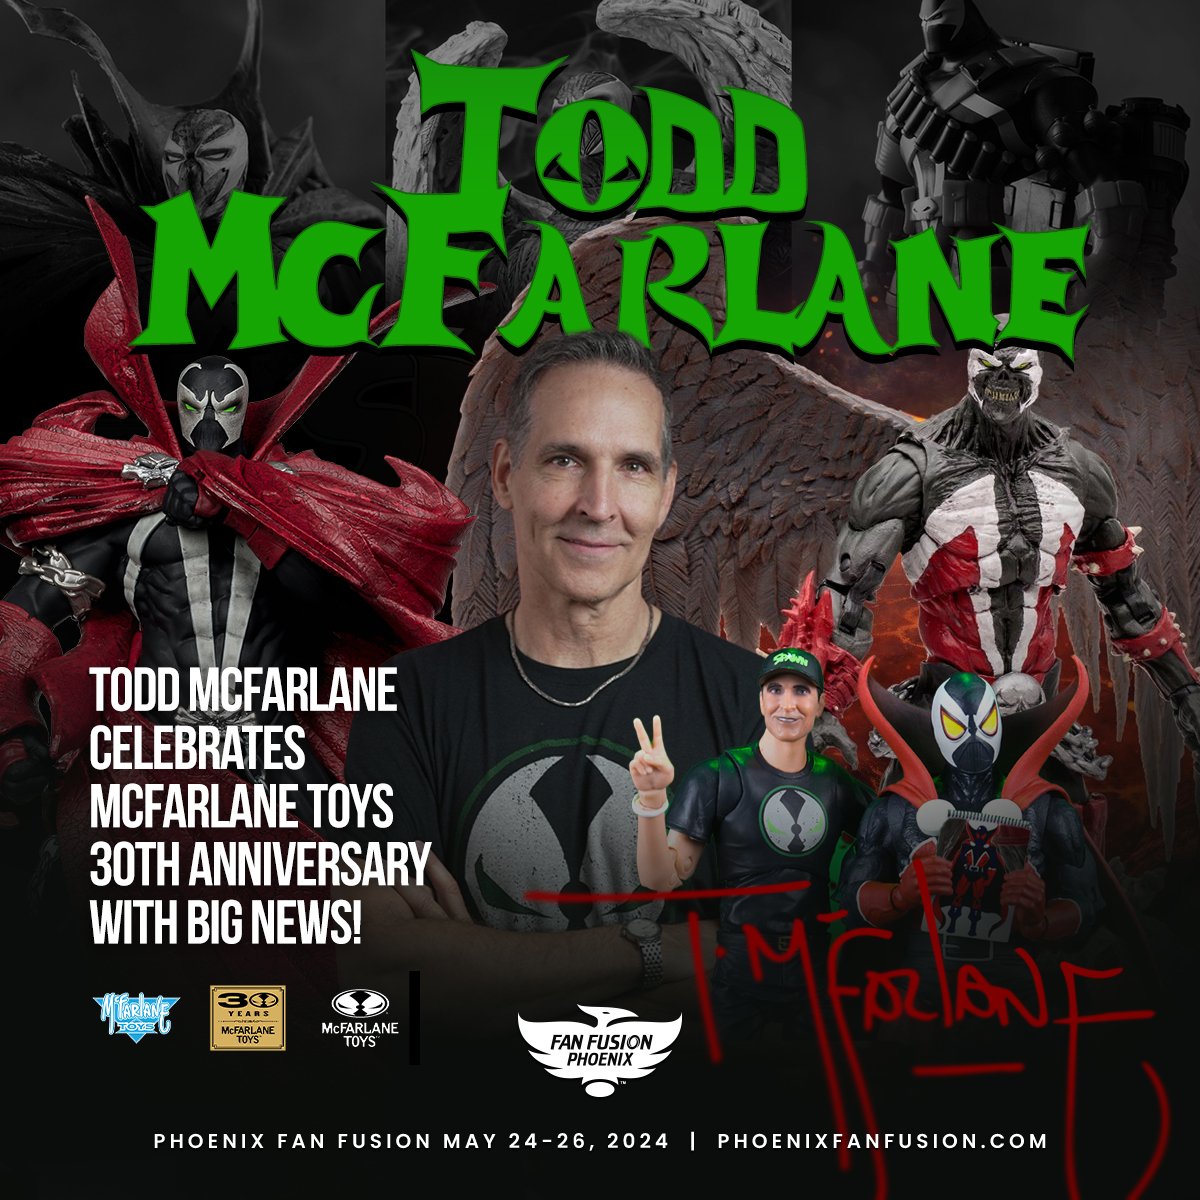 IM GOING TO PHX FAN FUSION! Check out MY PANEL in Rm. 132ABC on 05/24 at 12pm for a HUGE ANNOUNCEMENT! 
I'll be talking TOYS, COMICS, MOVIE, and MORE!
SEE YOU THERE!

TODD.

#phxfanfusion #imagecomics #spawn #mcfarlanetoys #toddmcfarlaneproductions #fanfusion2024